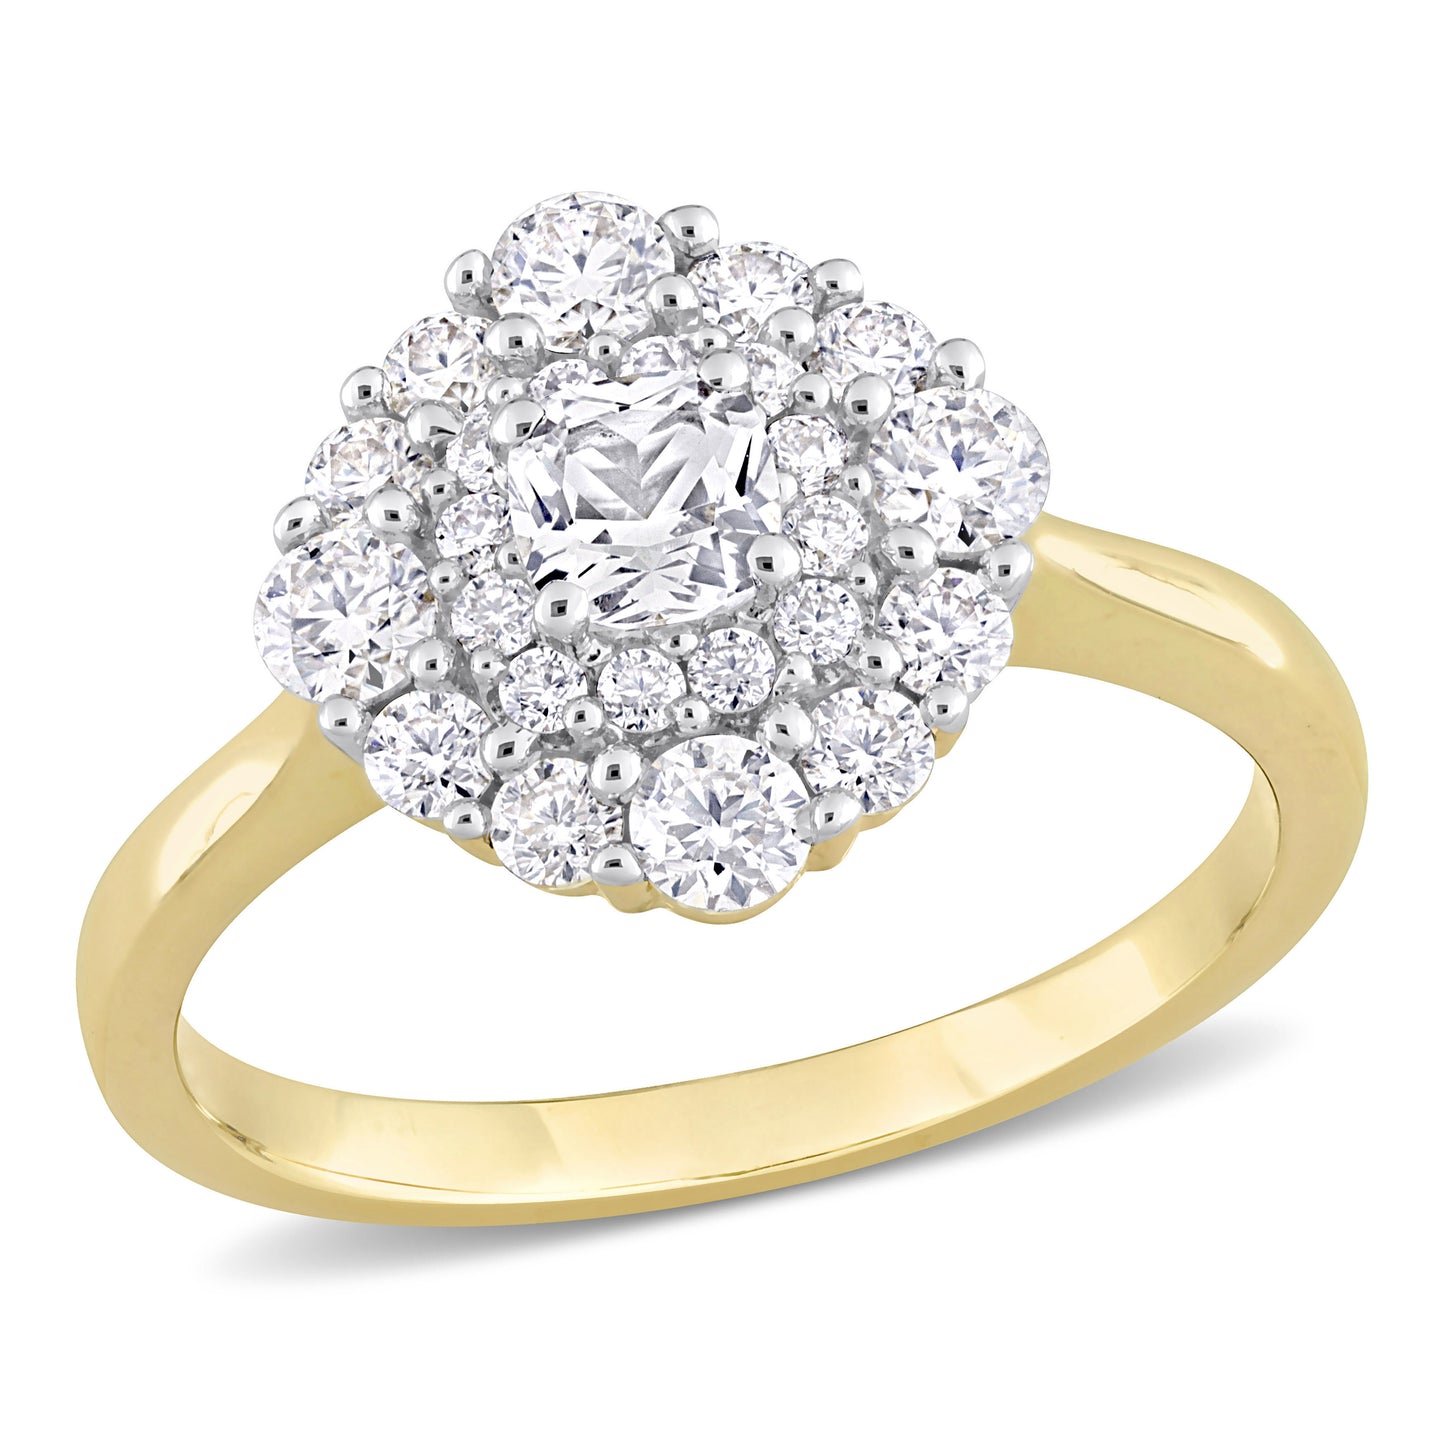 1ct Cushion Cut Moissanite Cluster Engagement Ring in 10k Yellow Gold